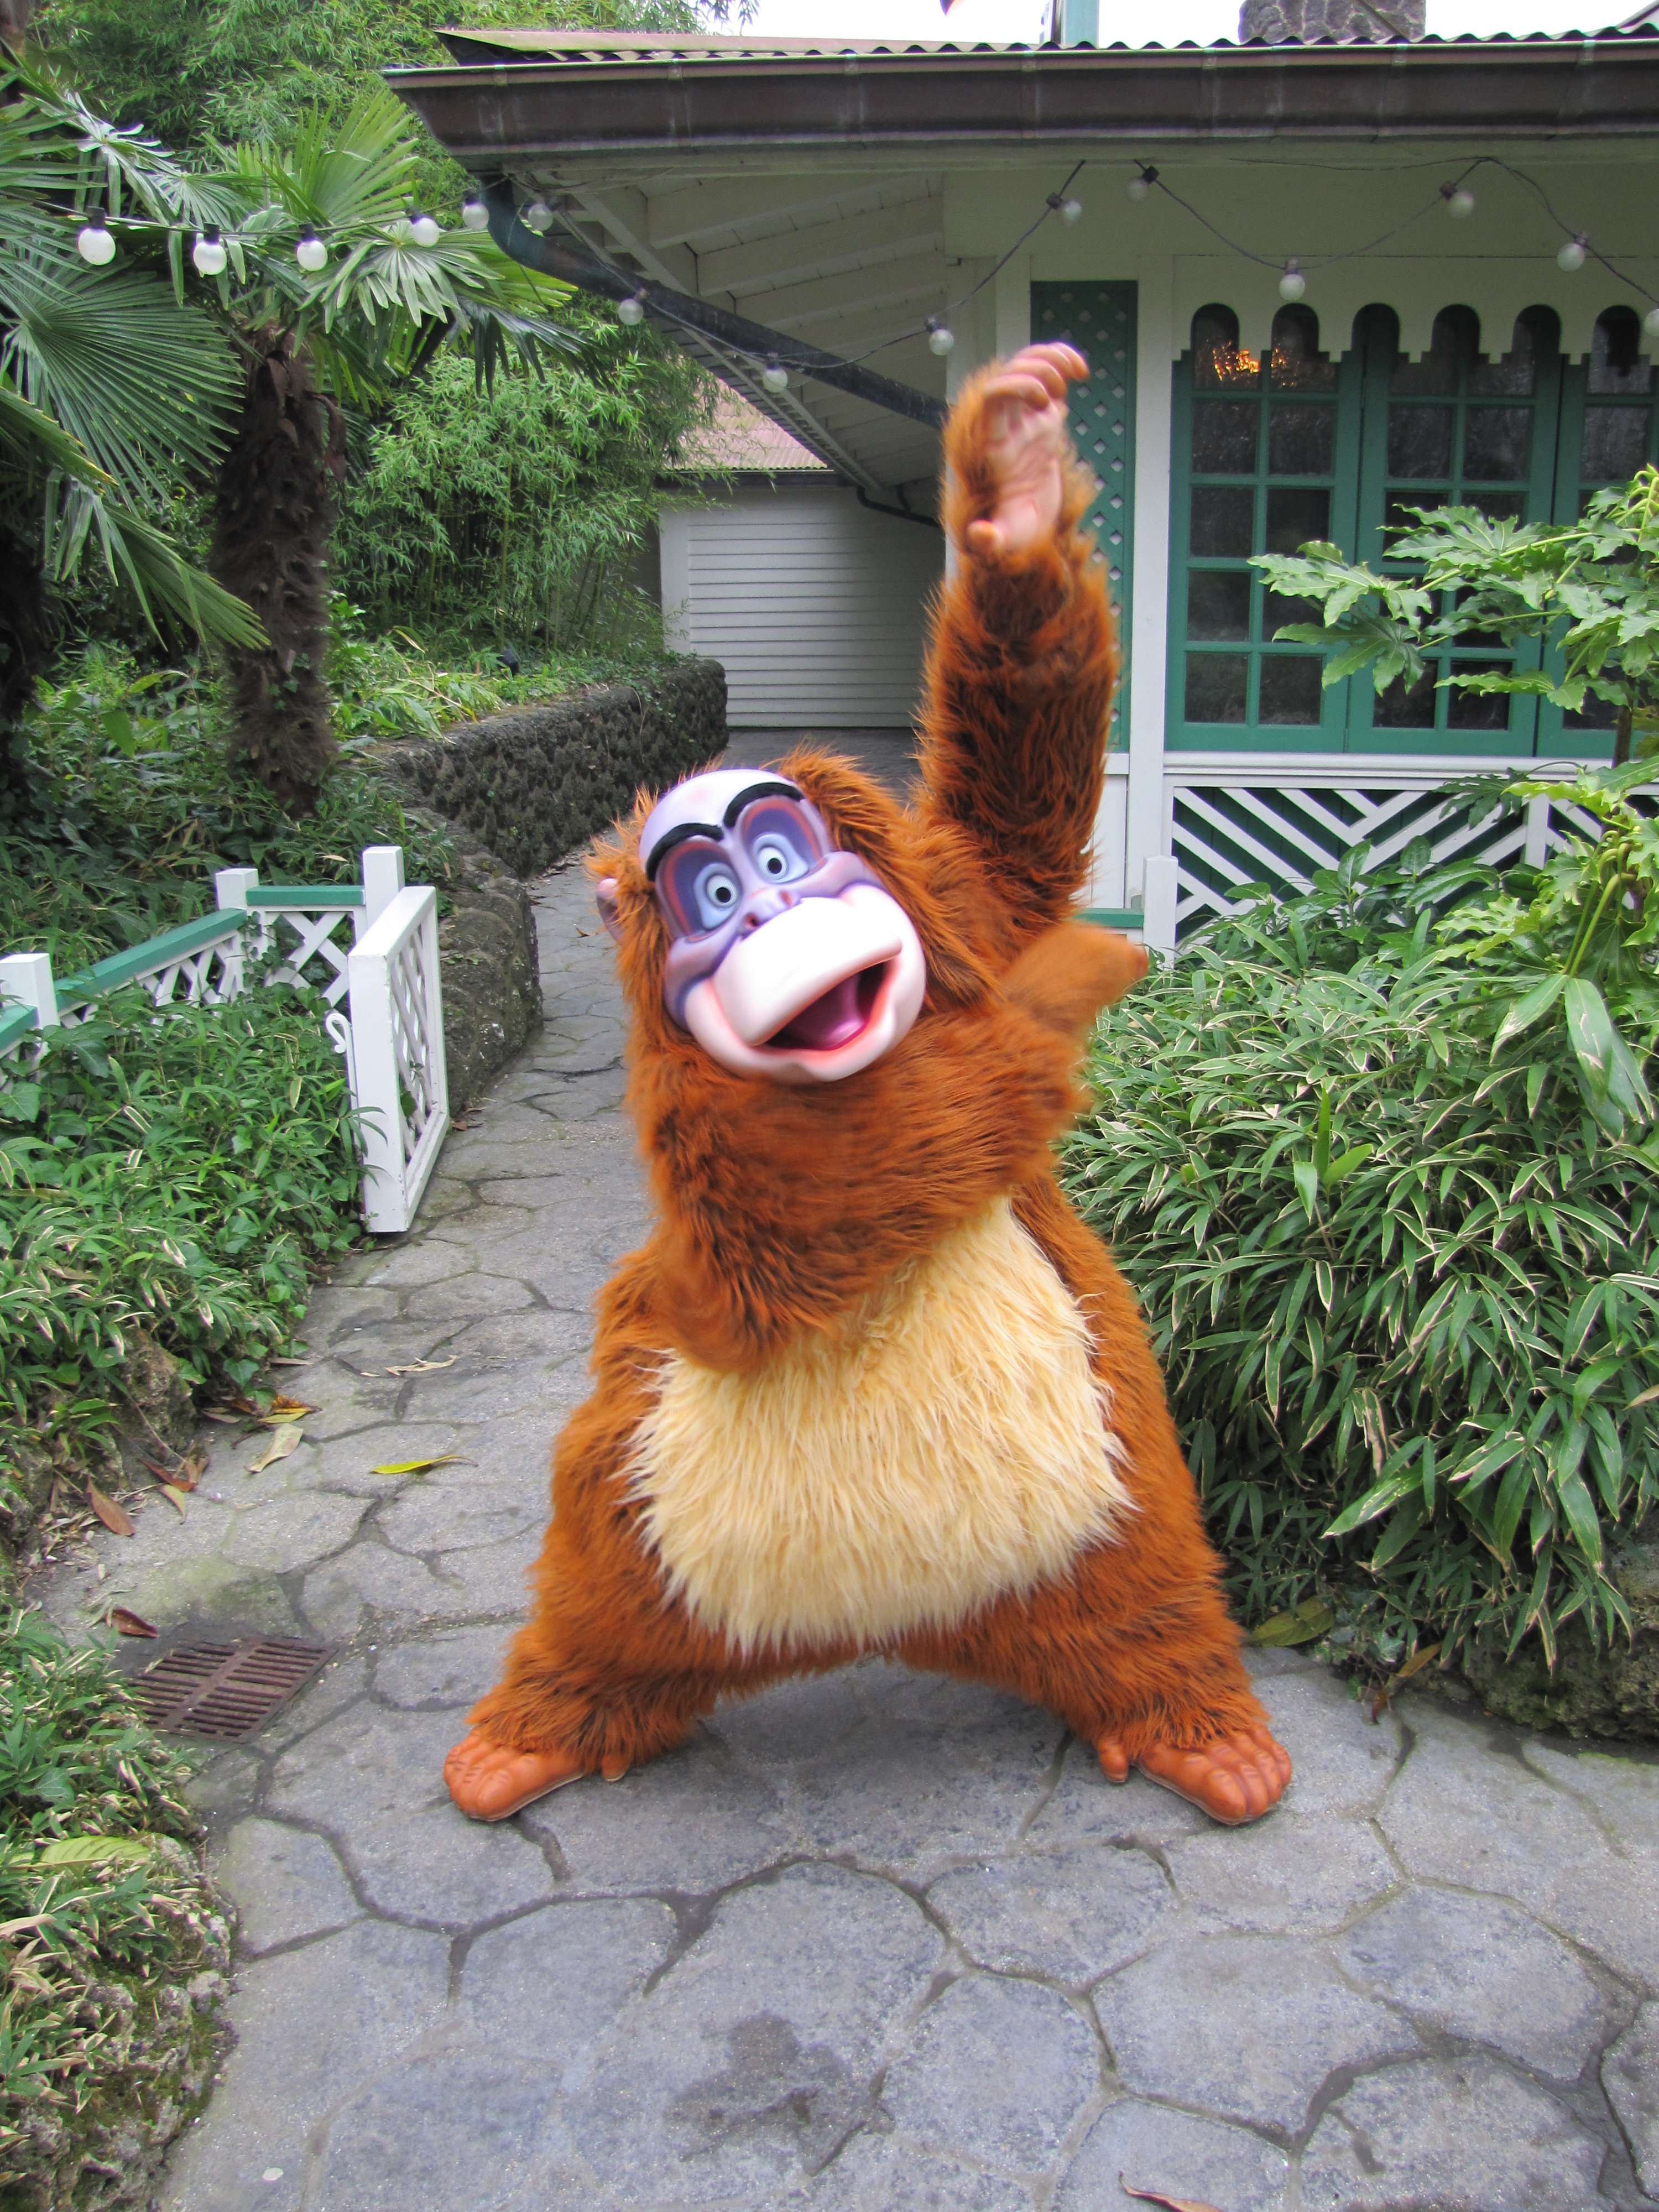 King Louie can be found most of the time in Adventureland.